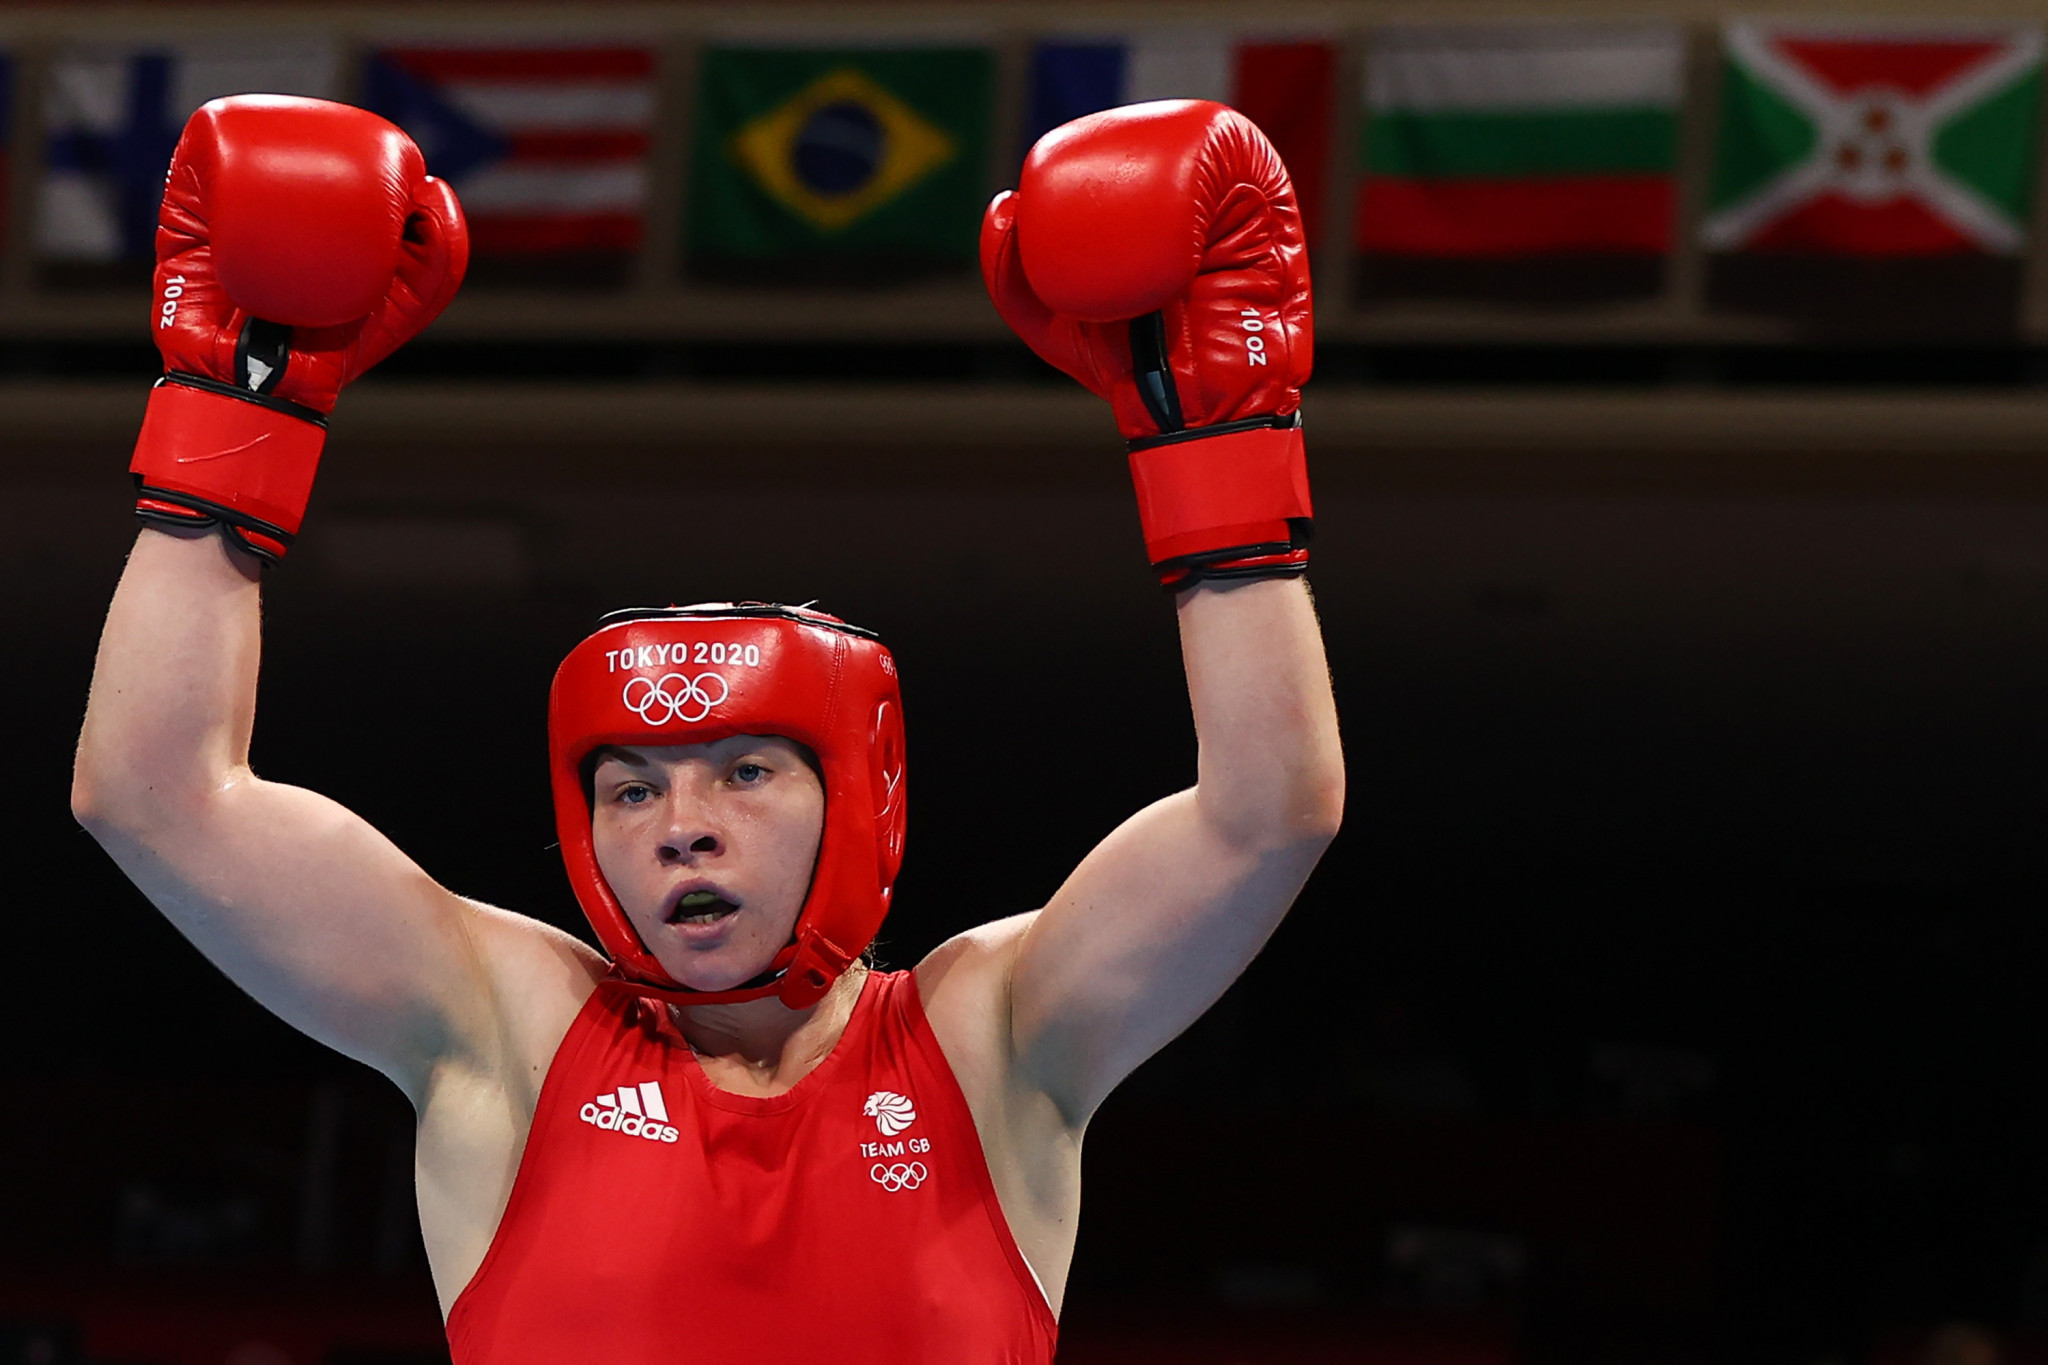 Lauren Price of Wales won an Olympic gold medal for Britain at Tokyo 2020 ©Getty Images